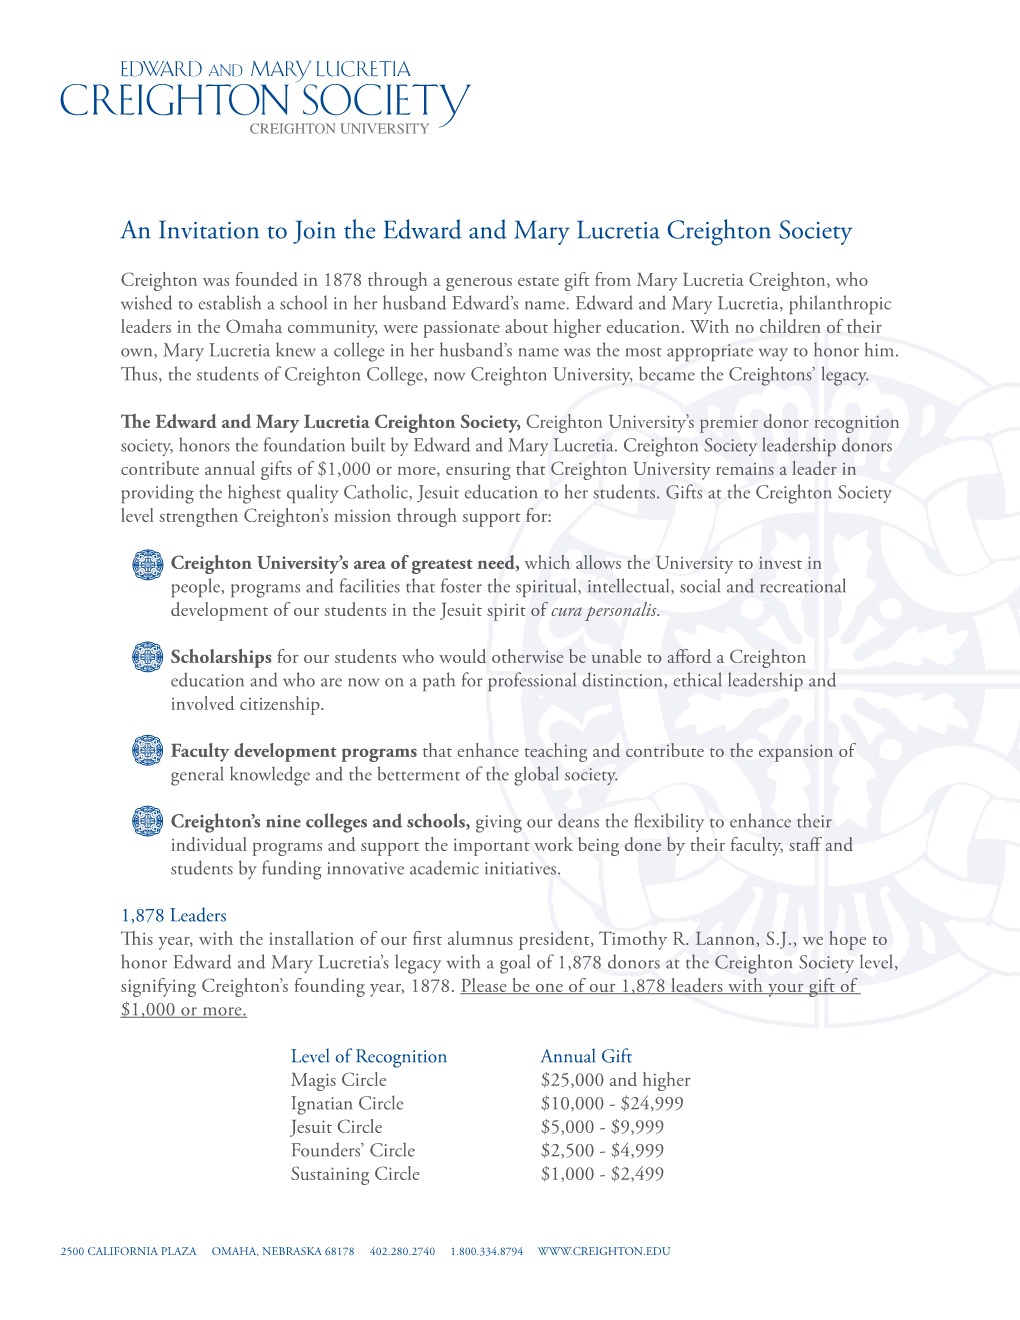 An Invitation to Join the Edward and Mary Lucretia Creighton Society